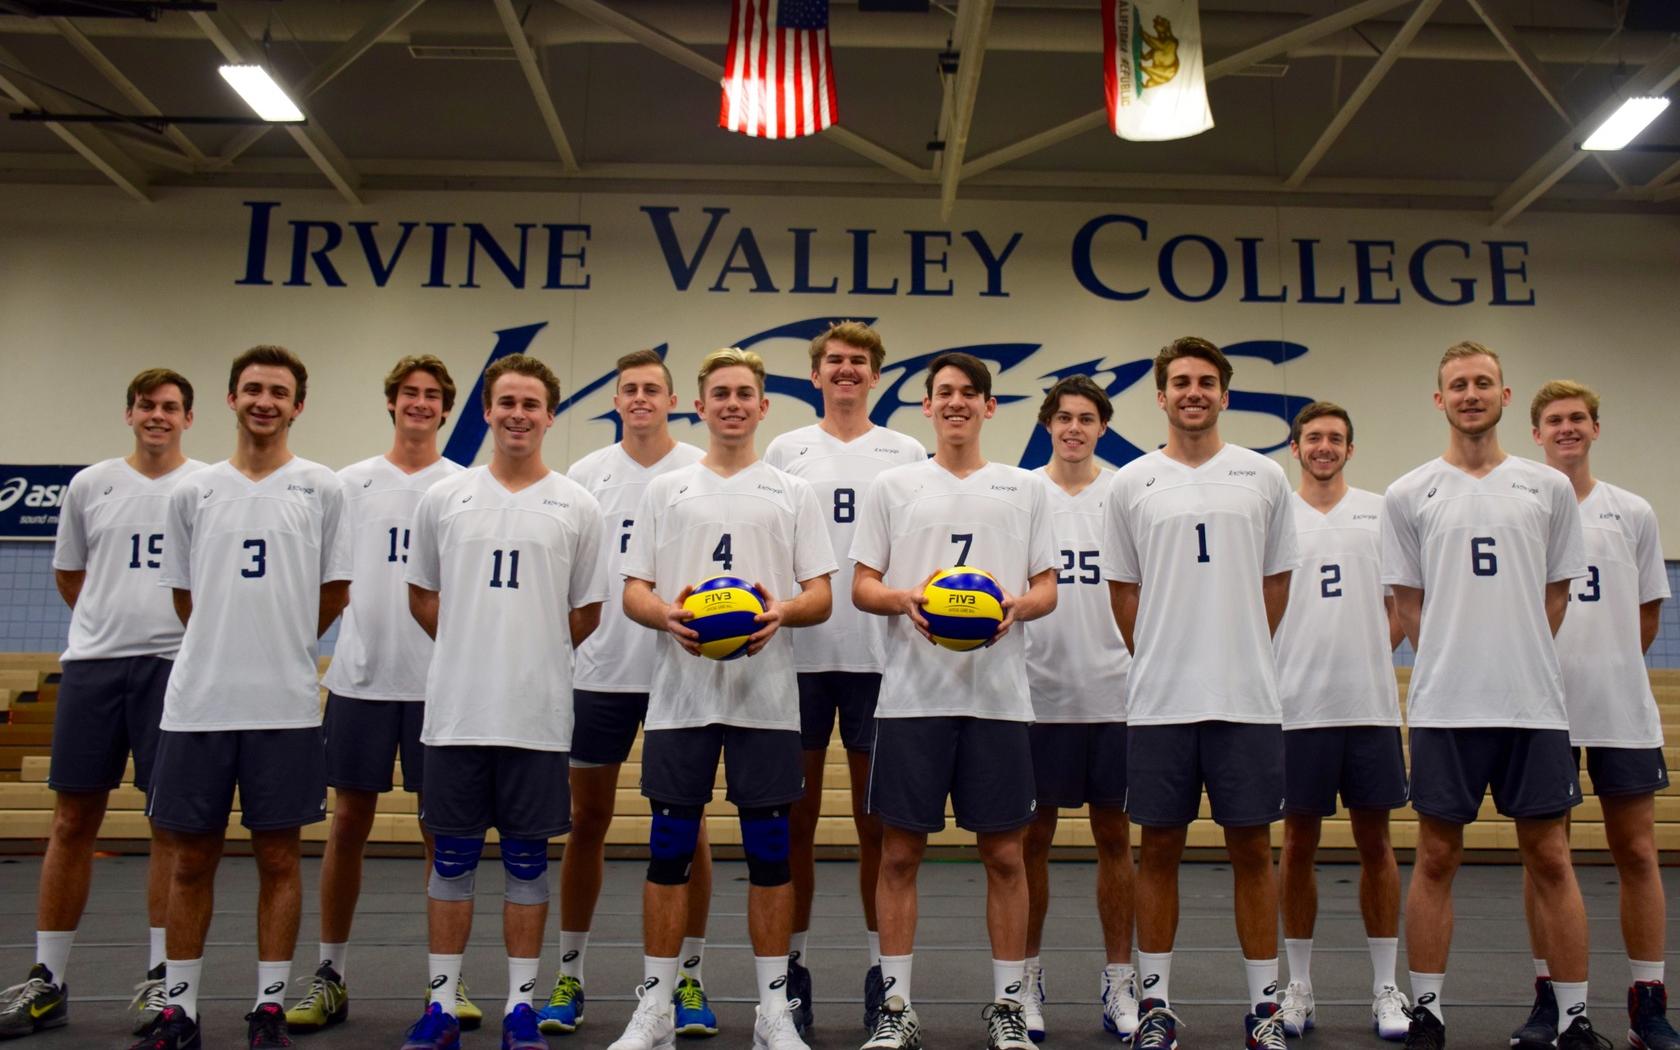 Men's volleyball team moves up to top spot in CCCMVCA state poll